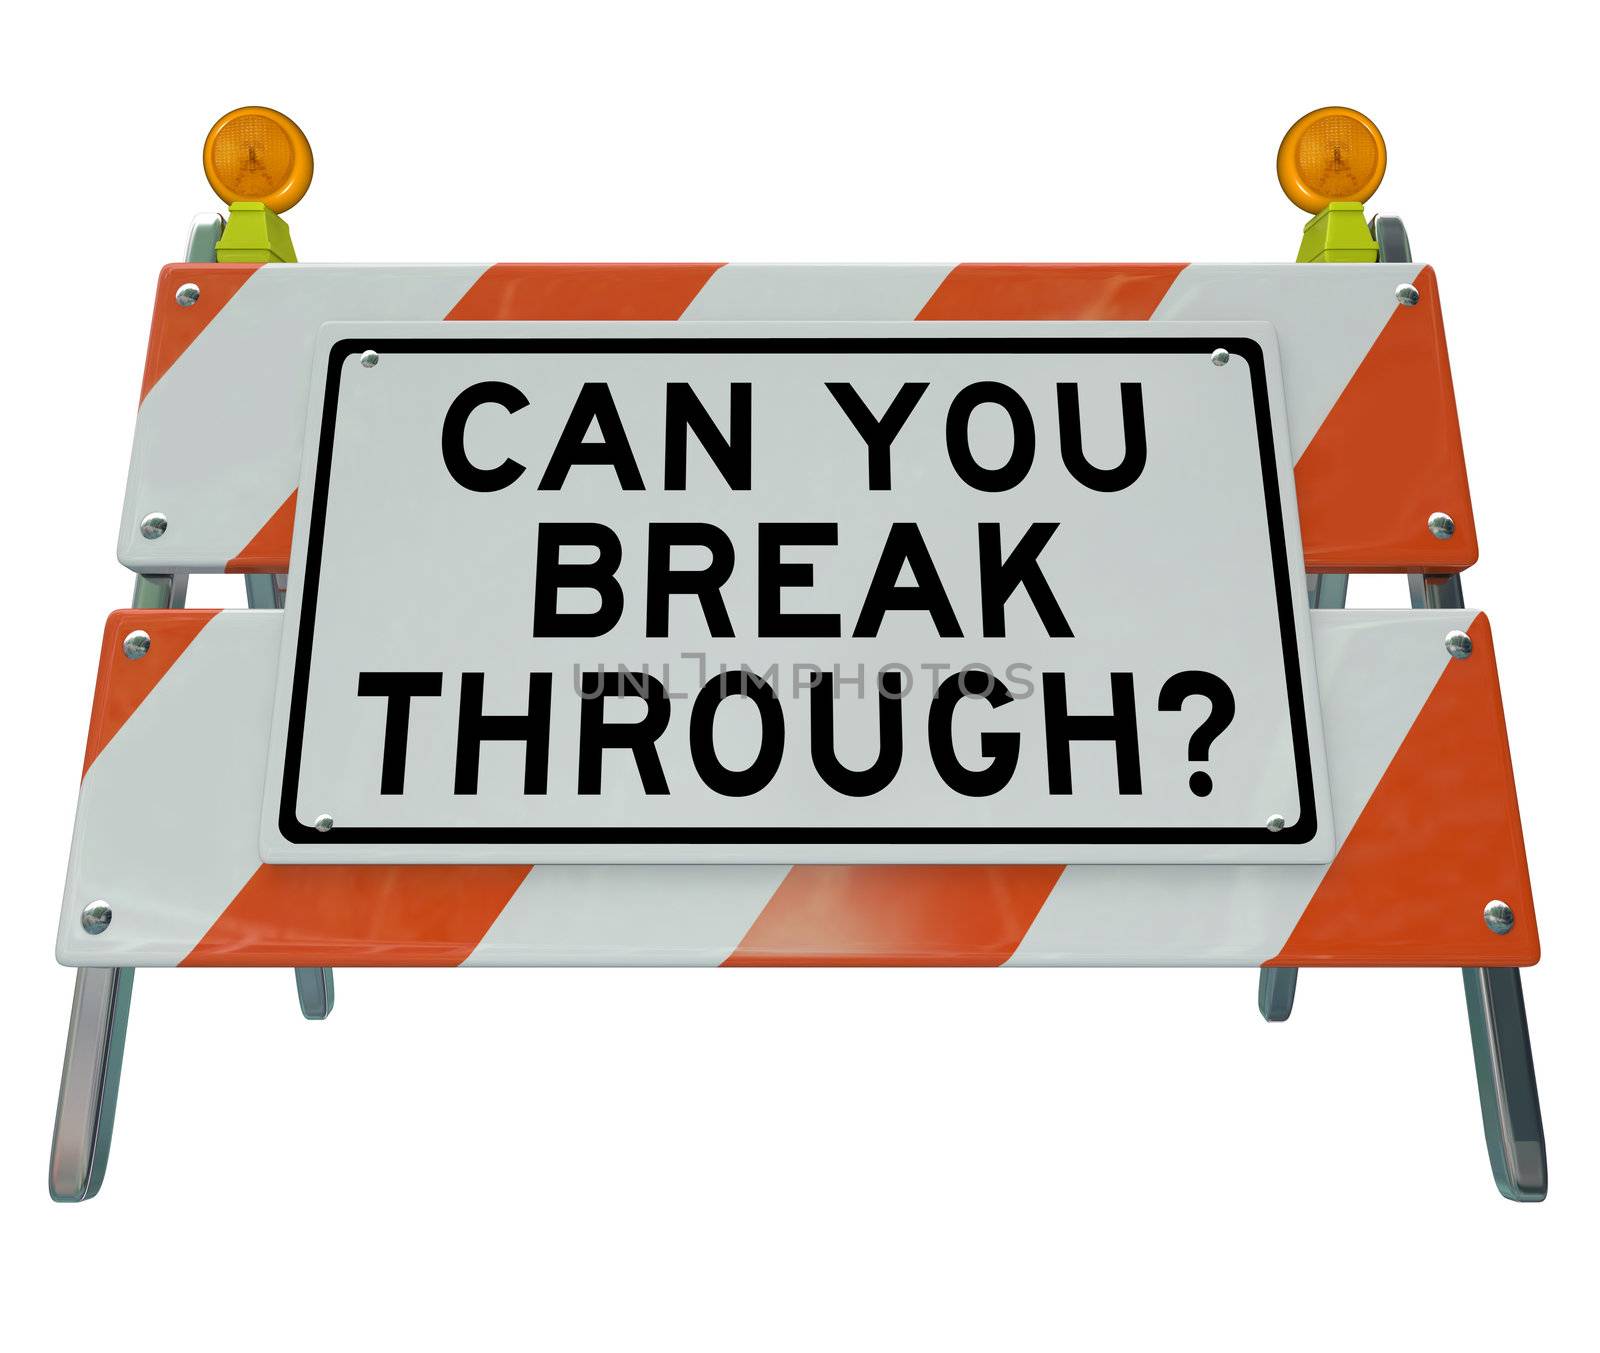 Can You Break Through Question on Barricade Roadblock by iQoncept